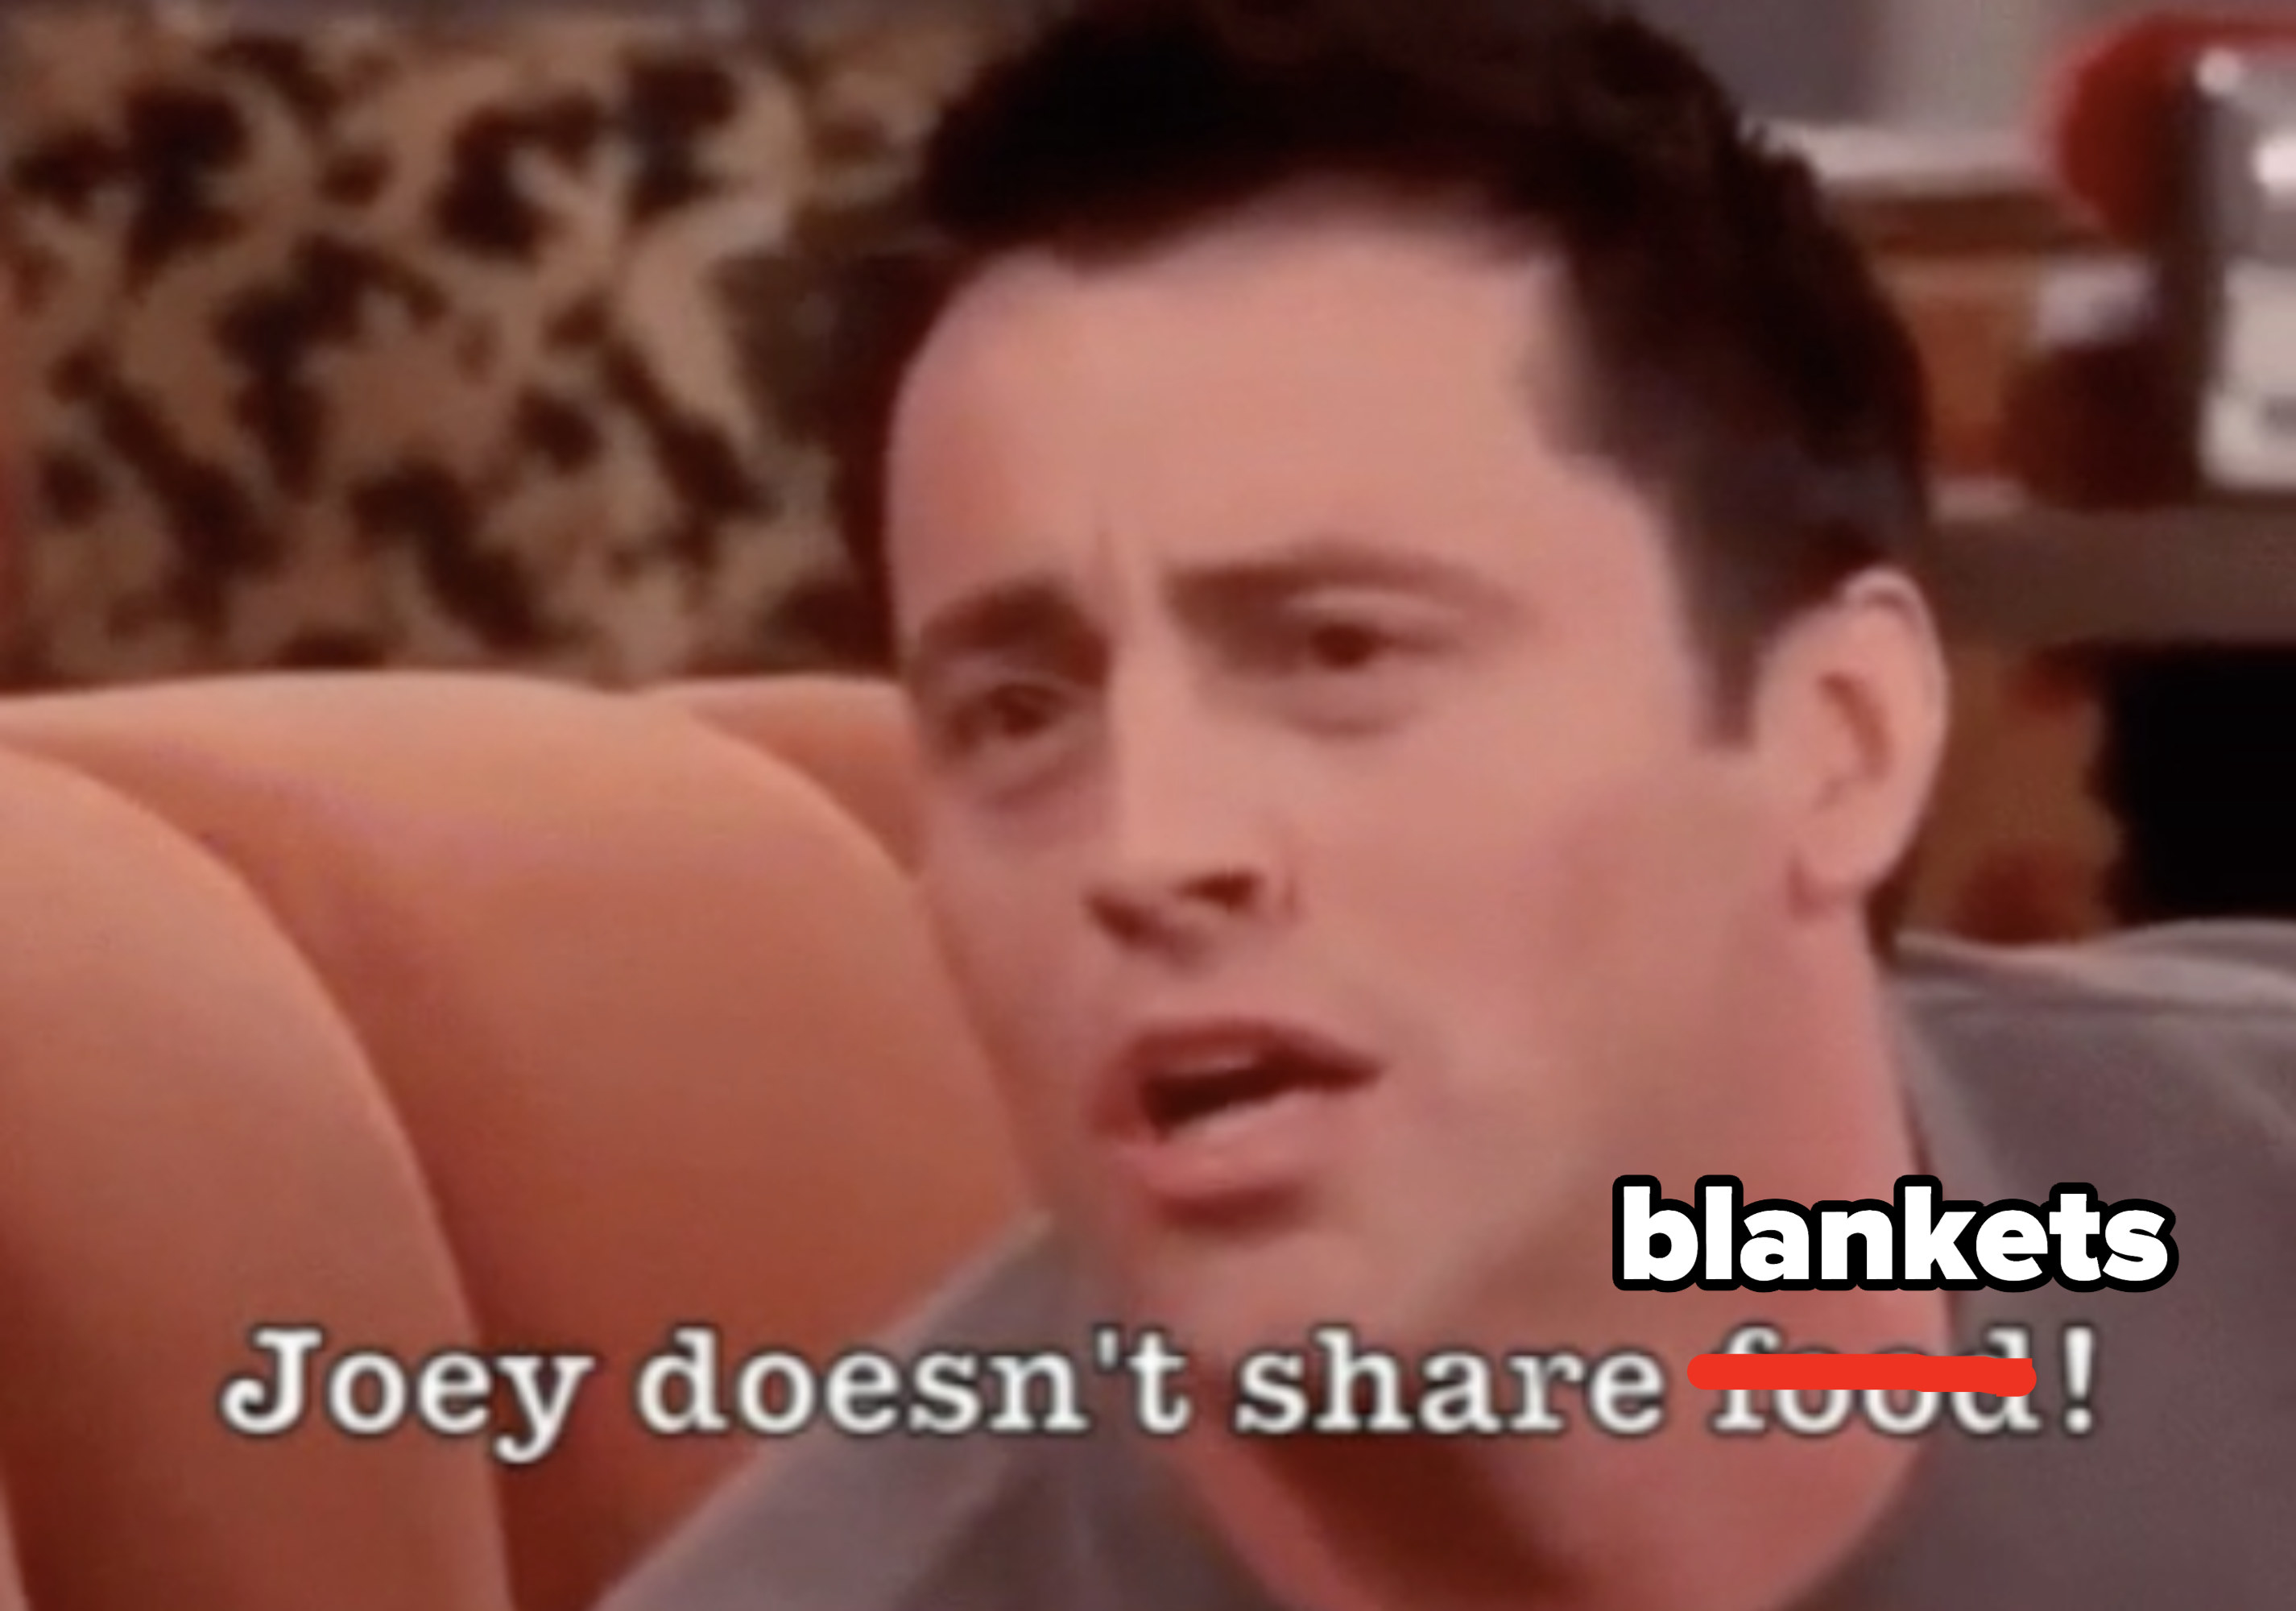 Joey from friends edited to say he doesn&#x27;t share blankets instead of food